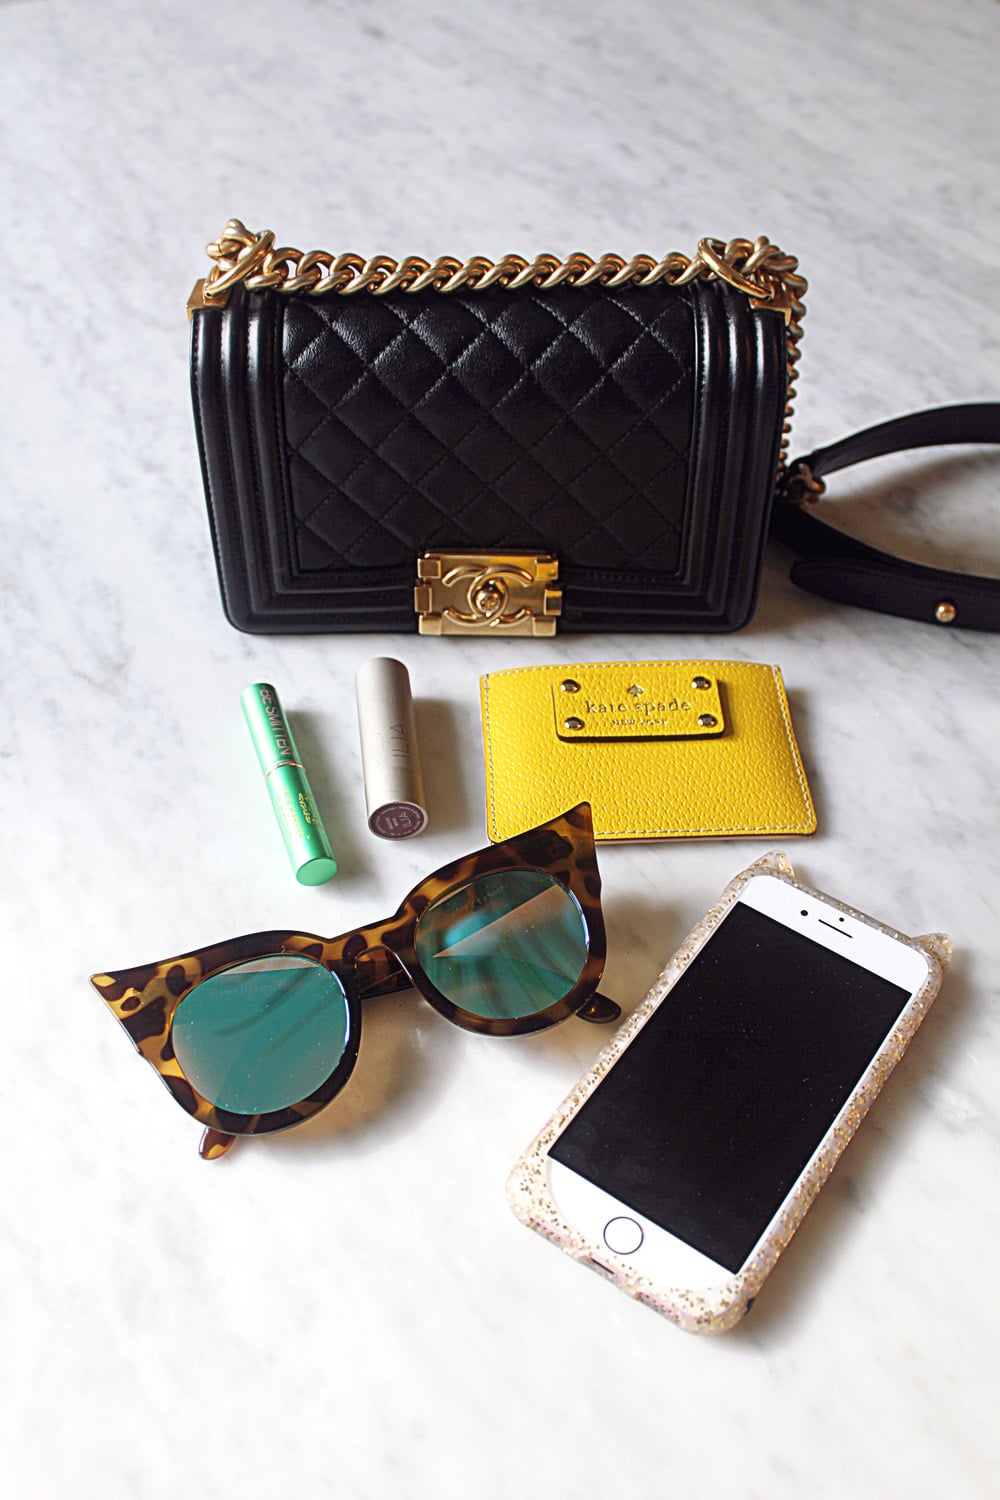 Five Reasons Why You Should Buy Yourself The Chanel Boy Bag! (Review) -  Fashion For Lunch.